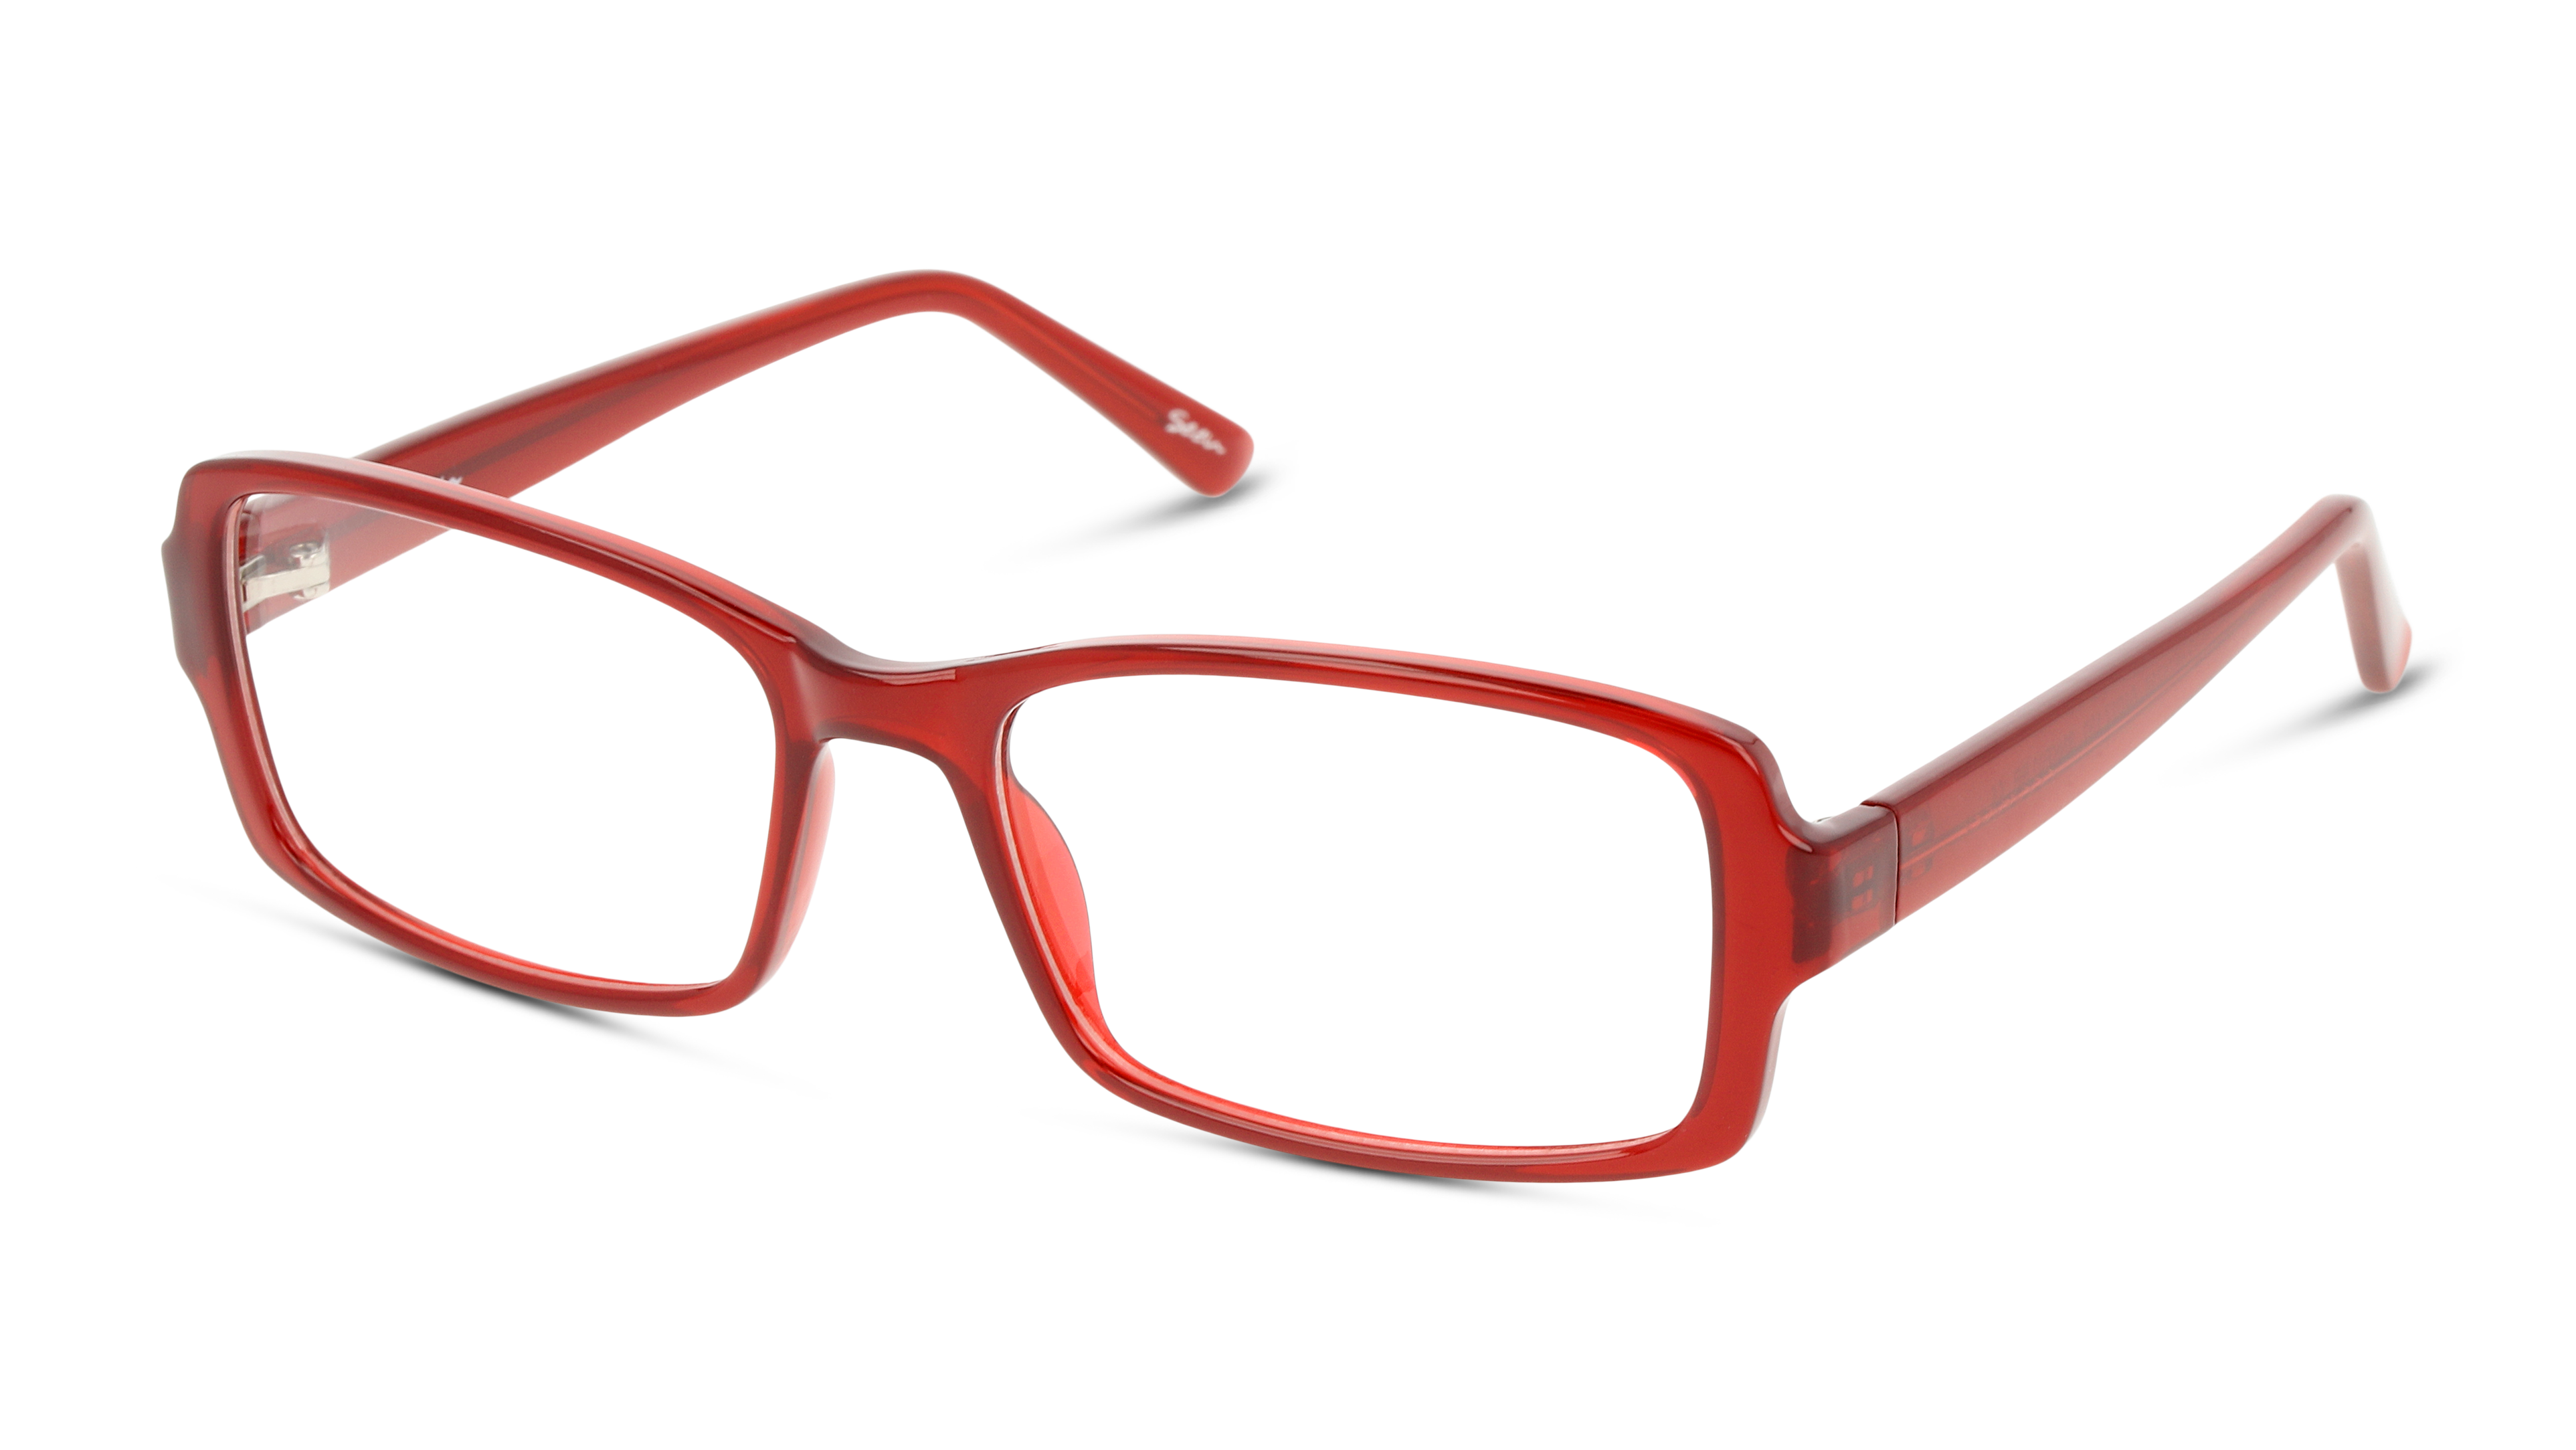 Angle_Left01 Seen SN KF01 Glasses Transparent / Red